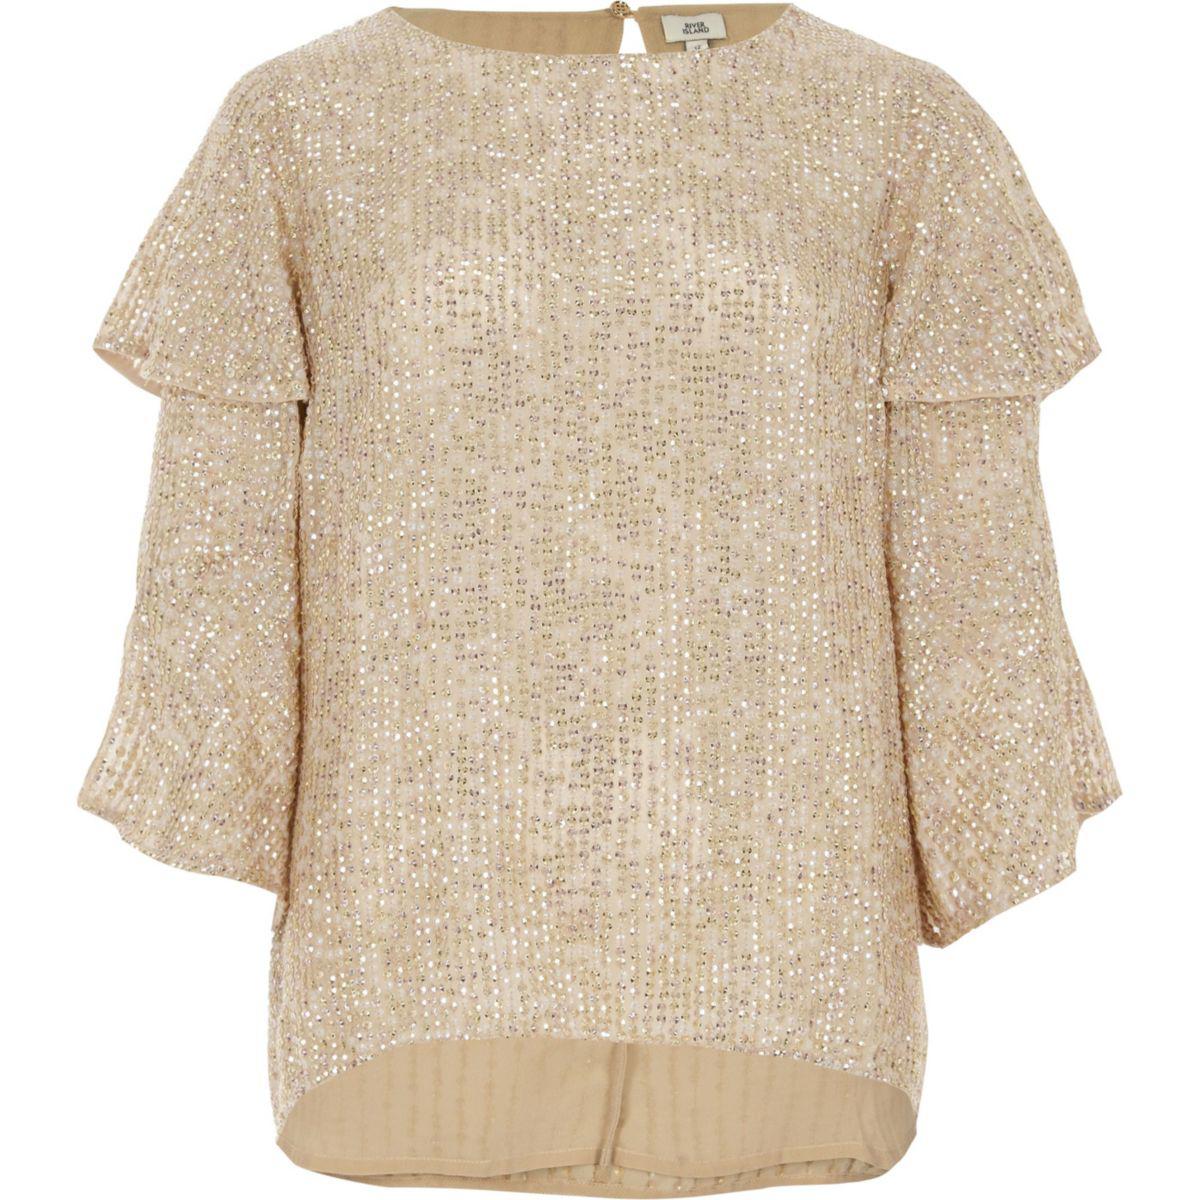 Lyst - River island Gold Sequin Embellished Frill Sleeve Top Gold ...